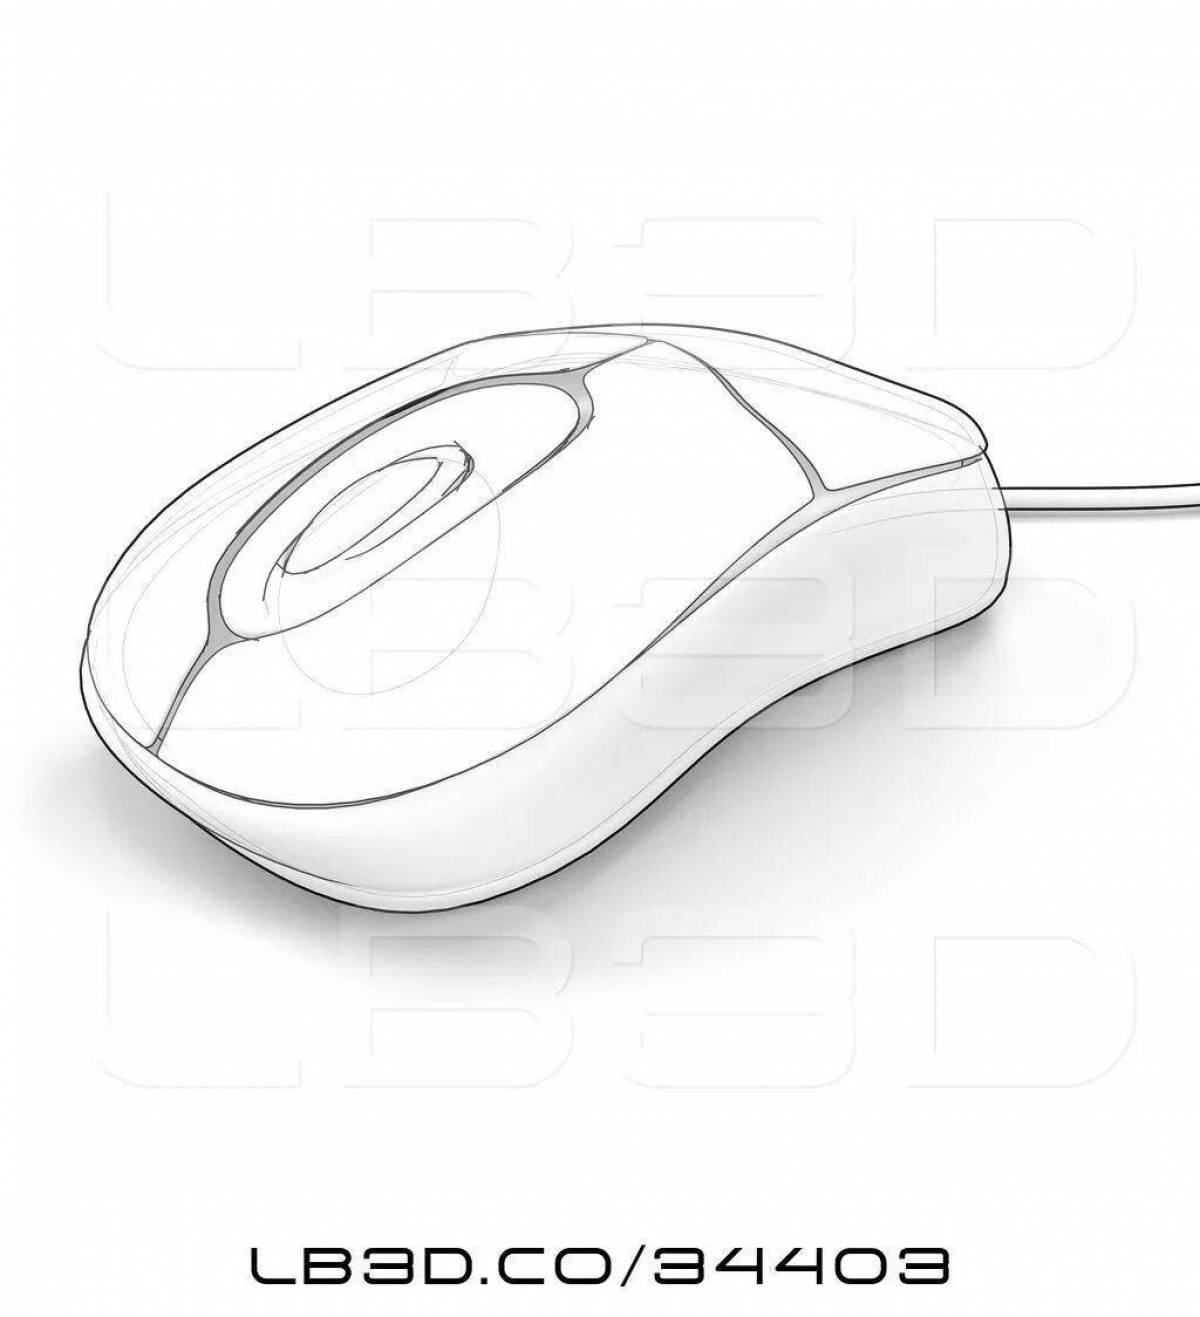 Coloring book funny computer mouse